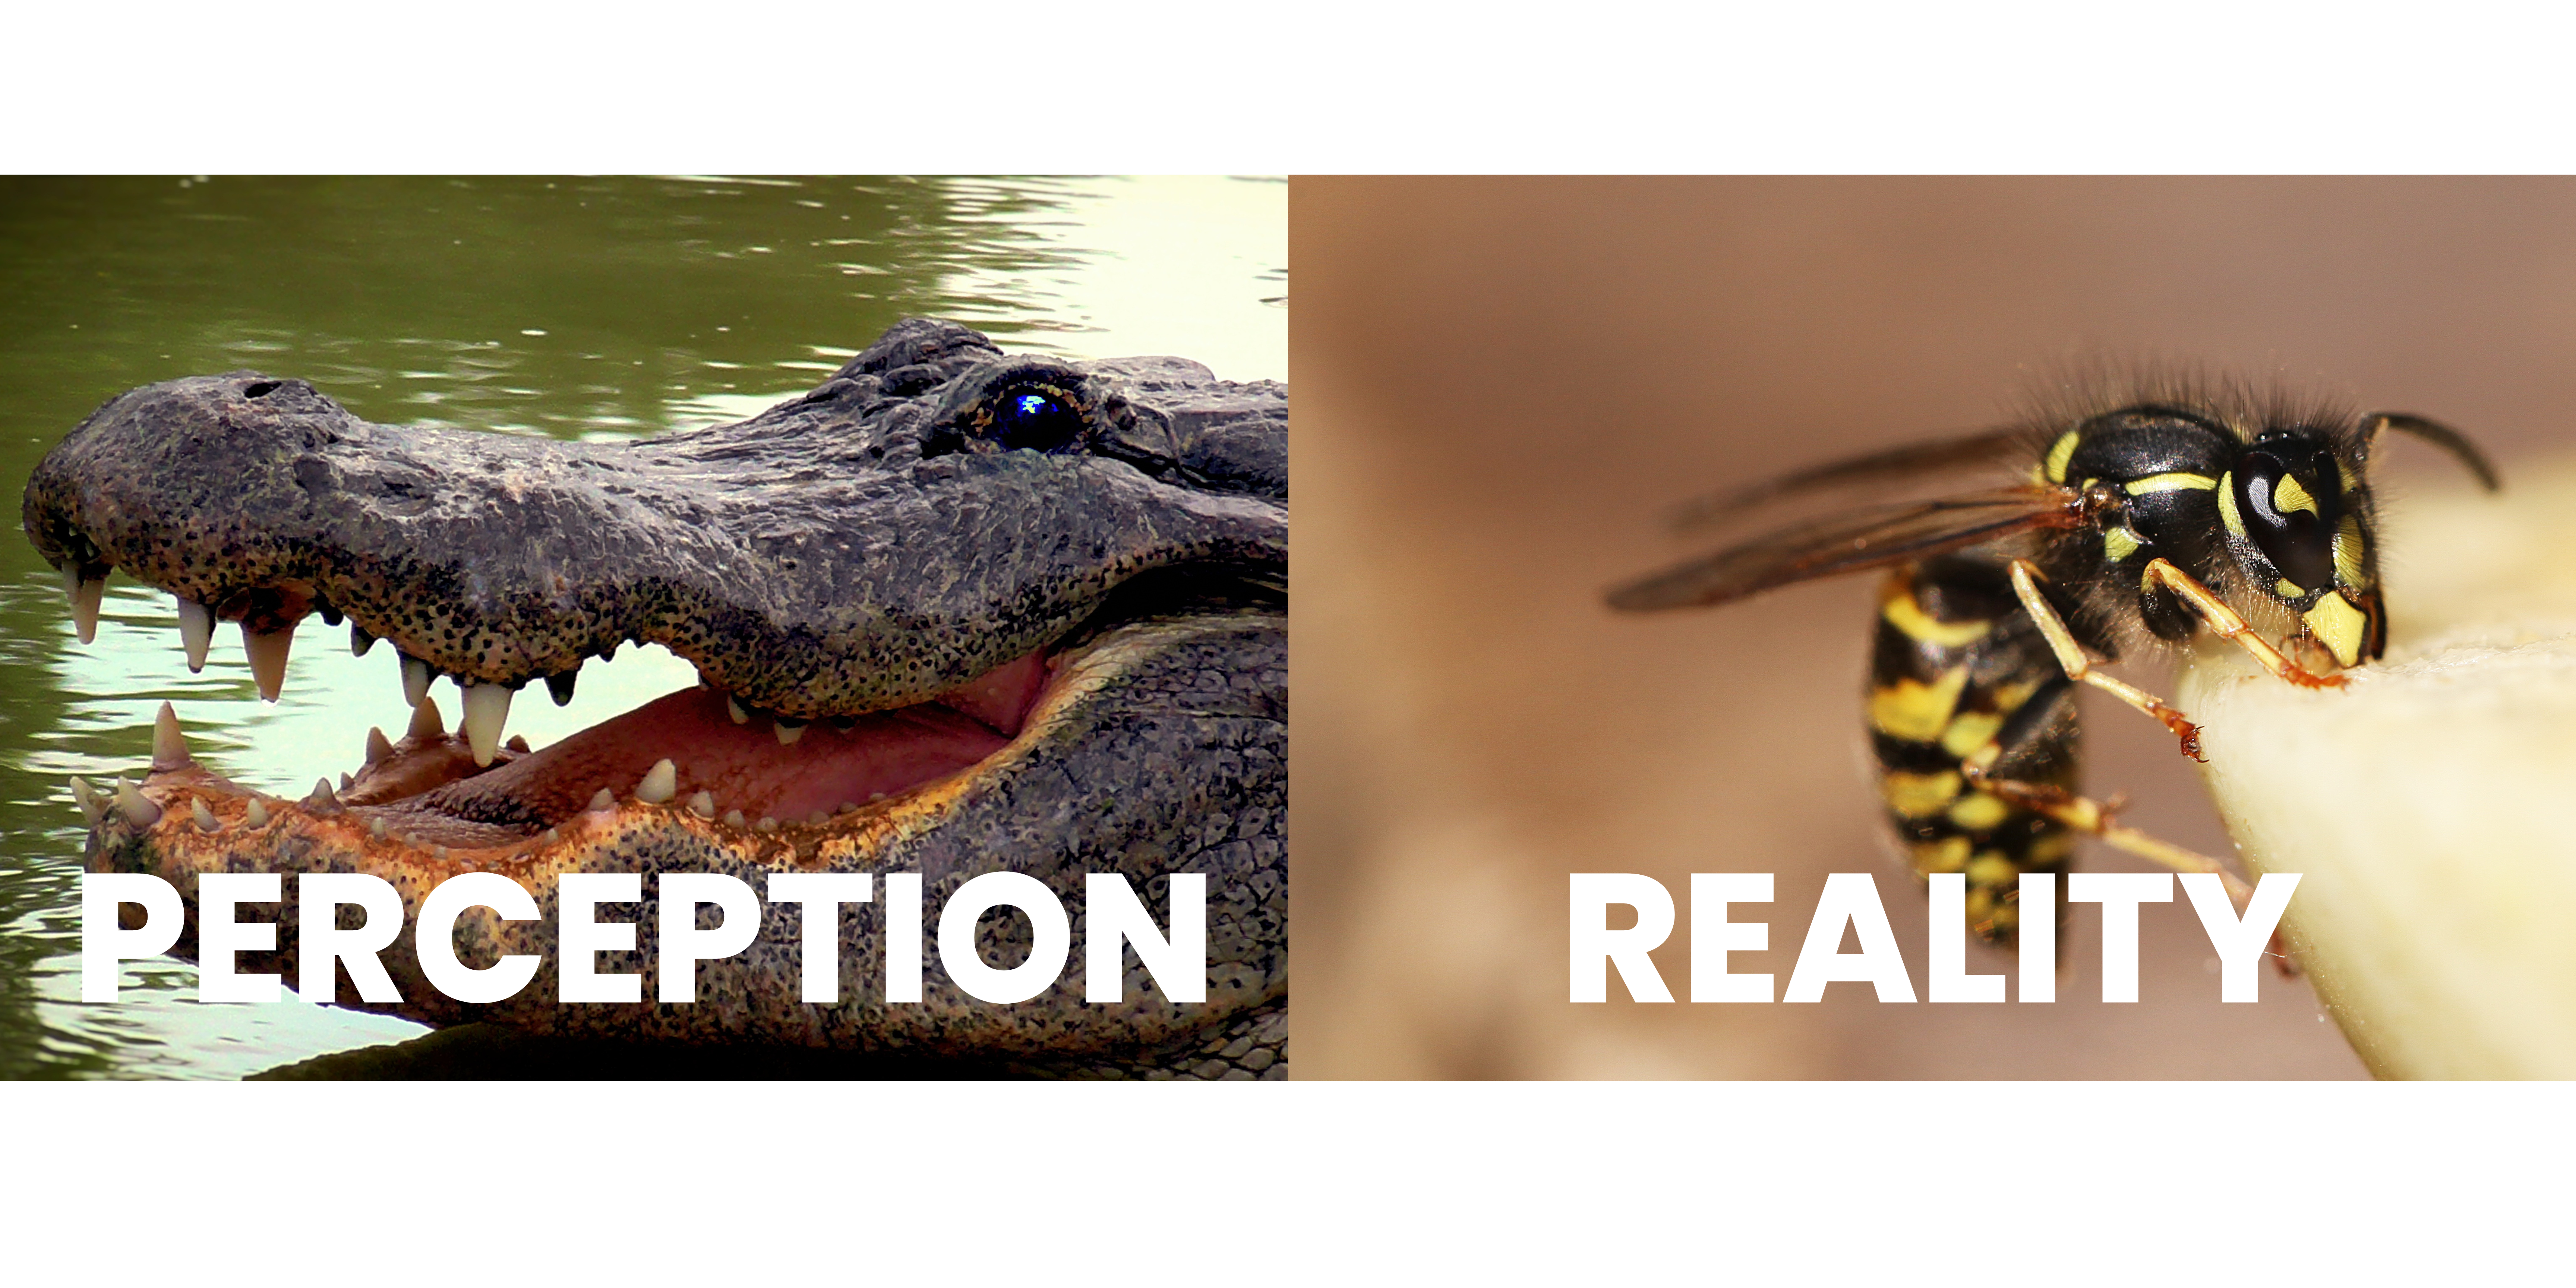 Alligator image as perception with a hornet as reality next to it to show stigma of pain from dental implants